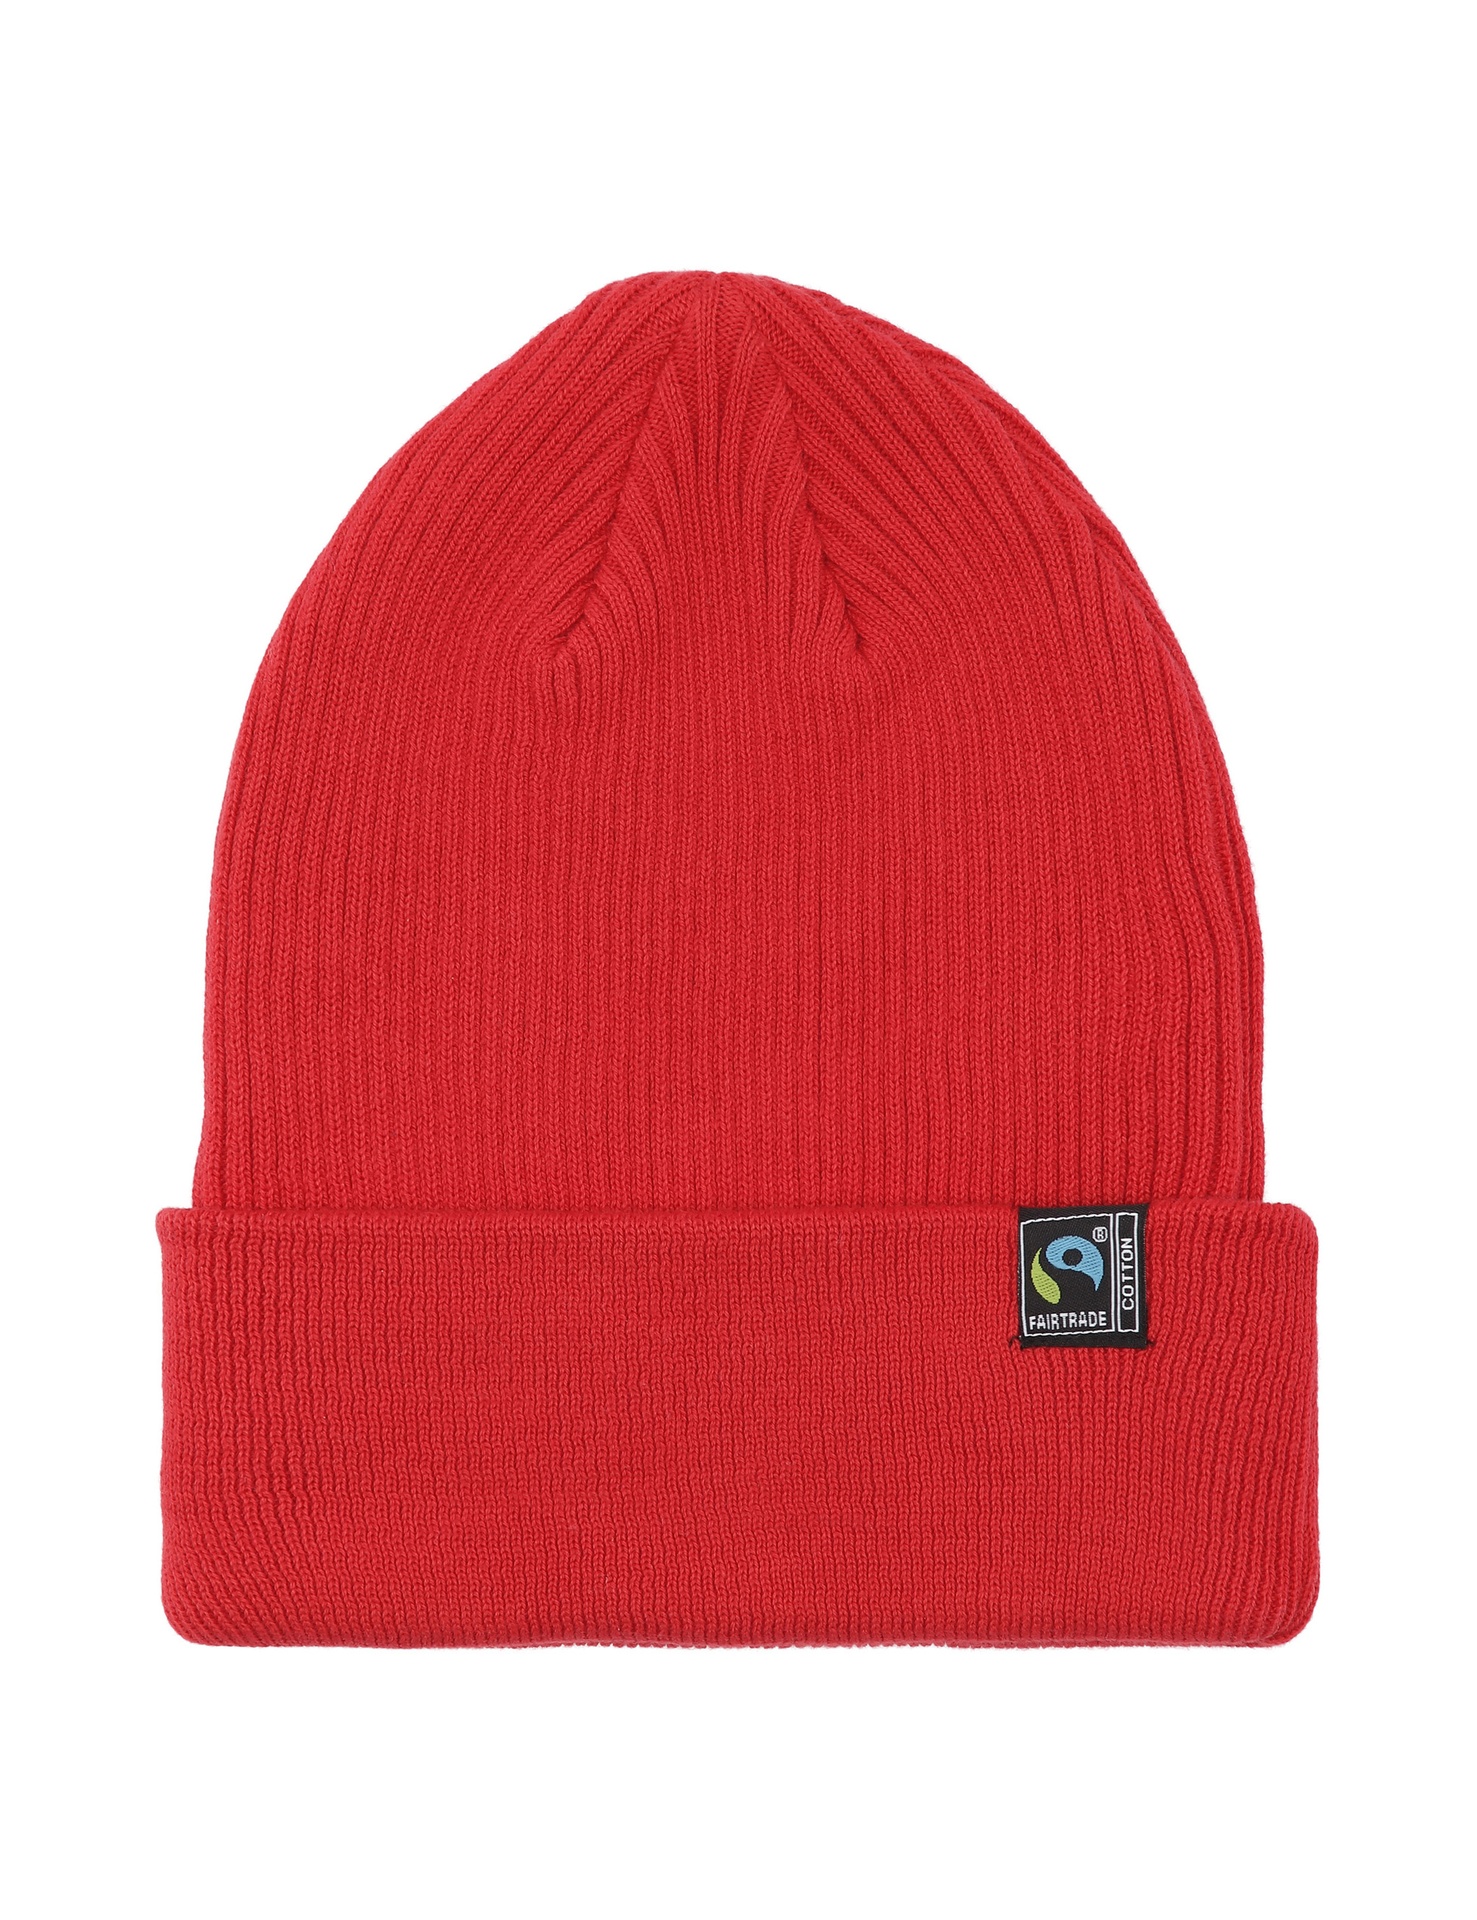 [PR/05921] Mixed Knit Beanie (Red 05)